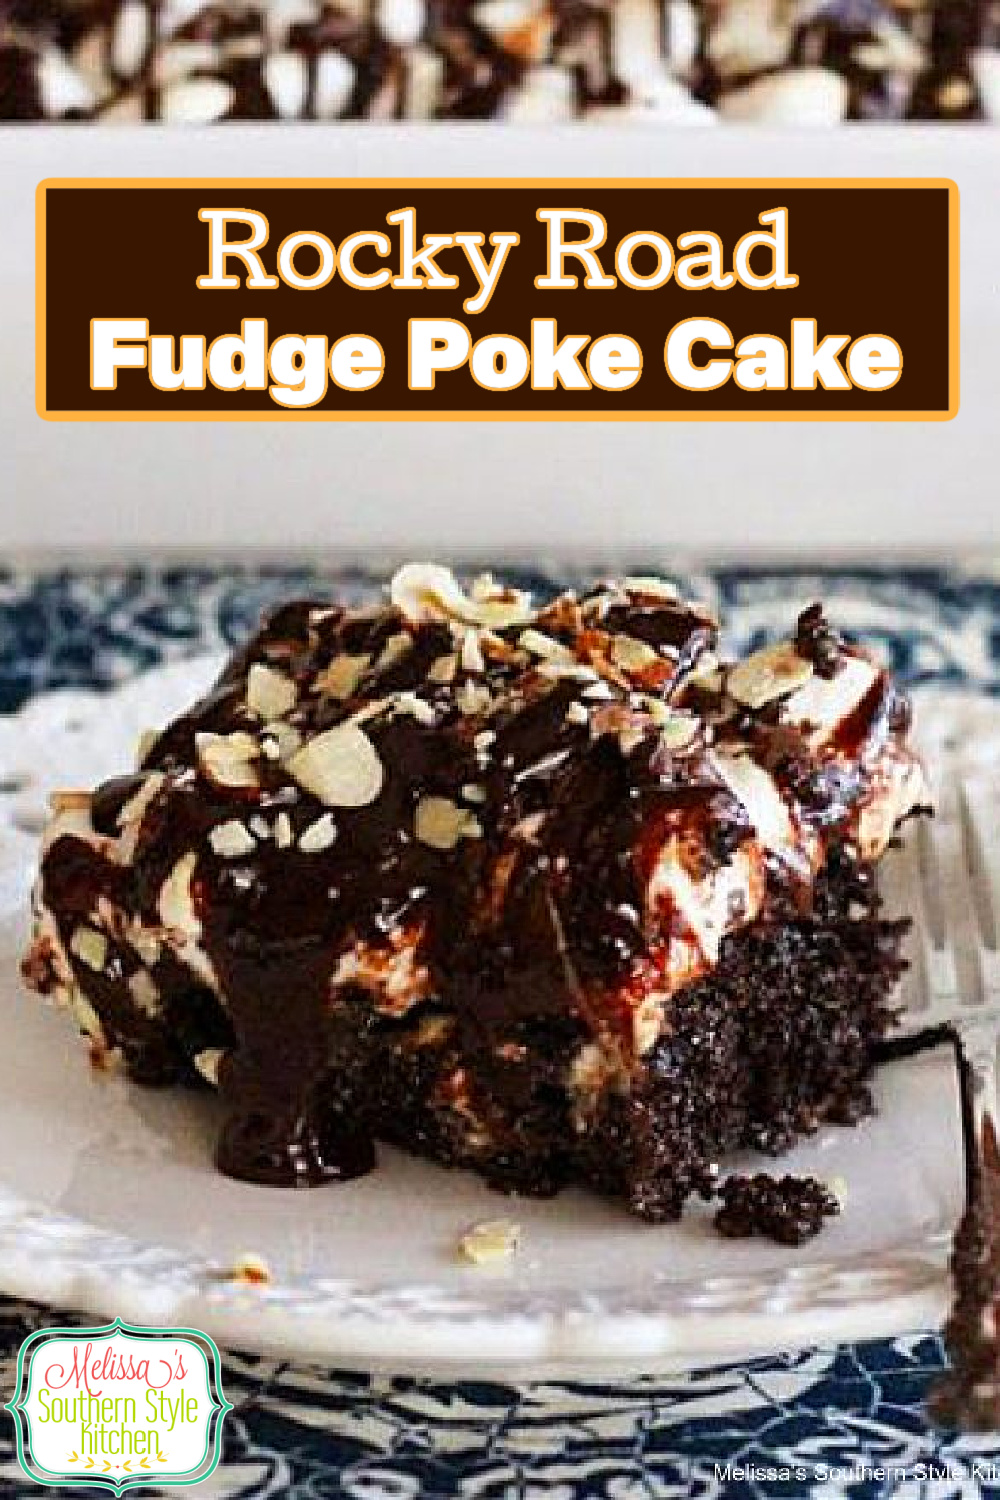 This rich and fudgy Rocky Road Poke Cake will satisfy your chocolate craving with every bite #rockyroad #fudgepokecake #chocolatecakerecipes #chocolatecake #fudgepokecake #pokecakerecipes #cakemixrecipes #southernrecipes #fudgepokecake